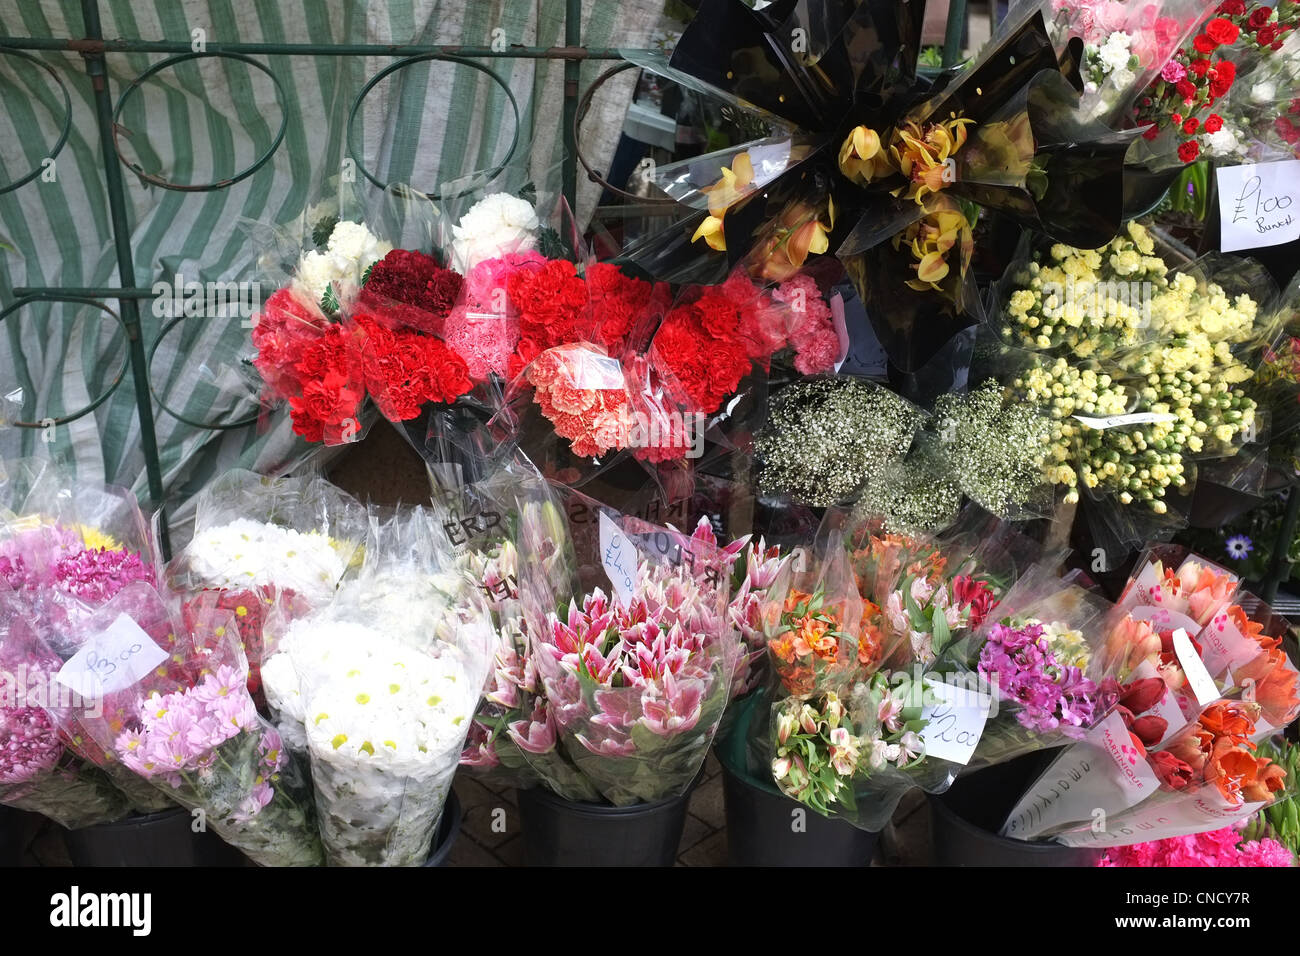 Cut Flowers for sale on a market stall in a High Street Stock Photo